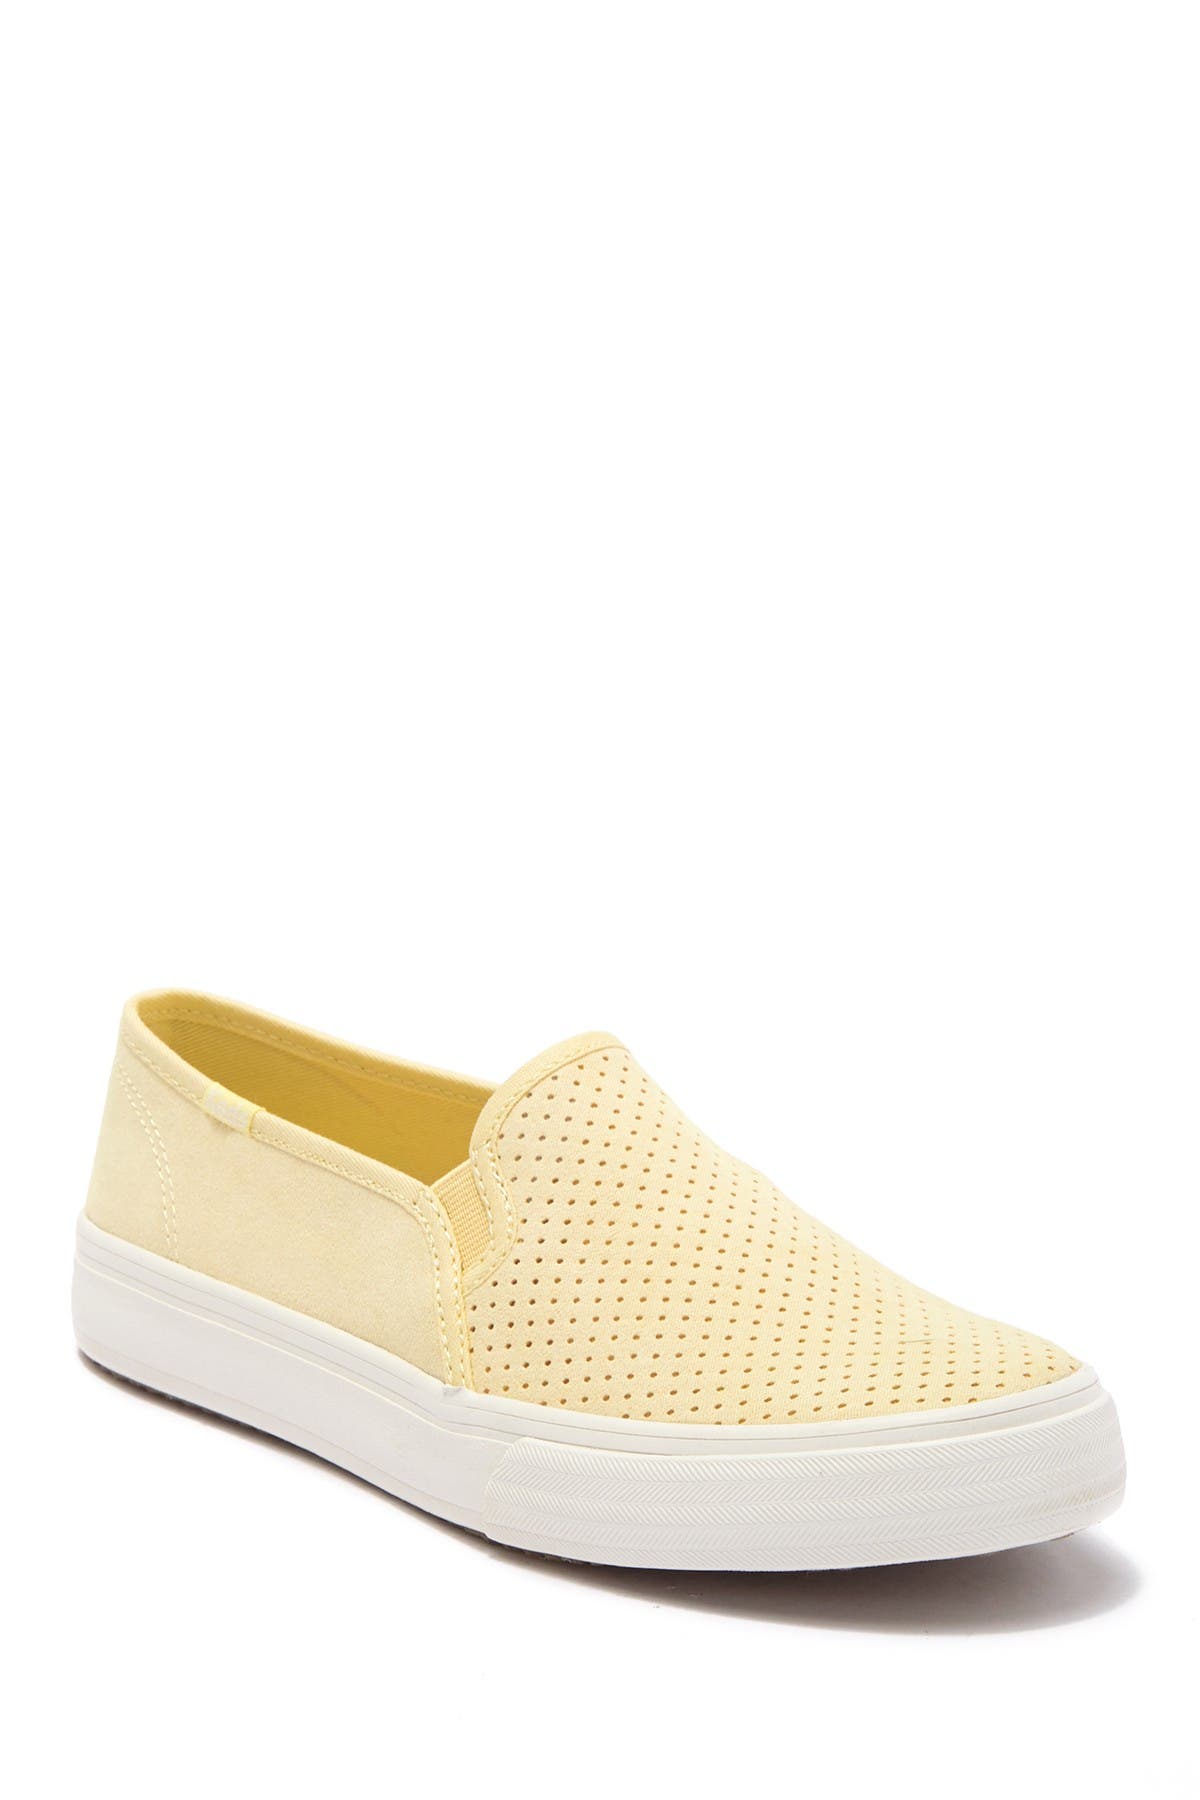 keds perforated slip on